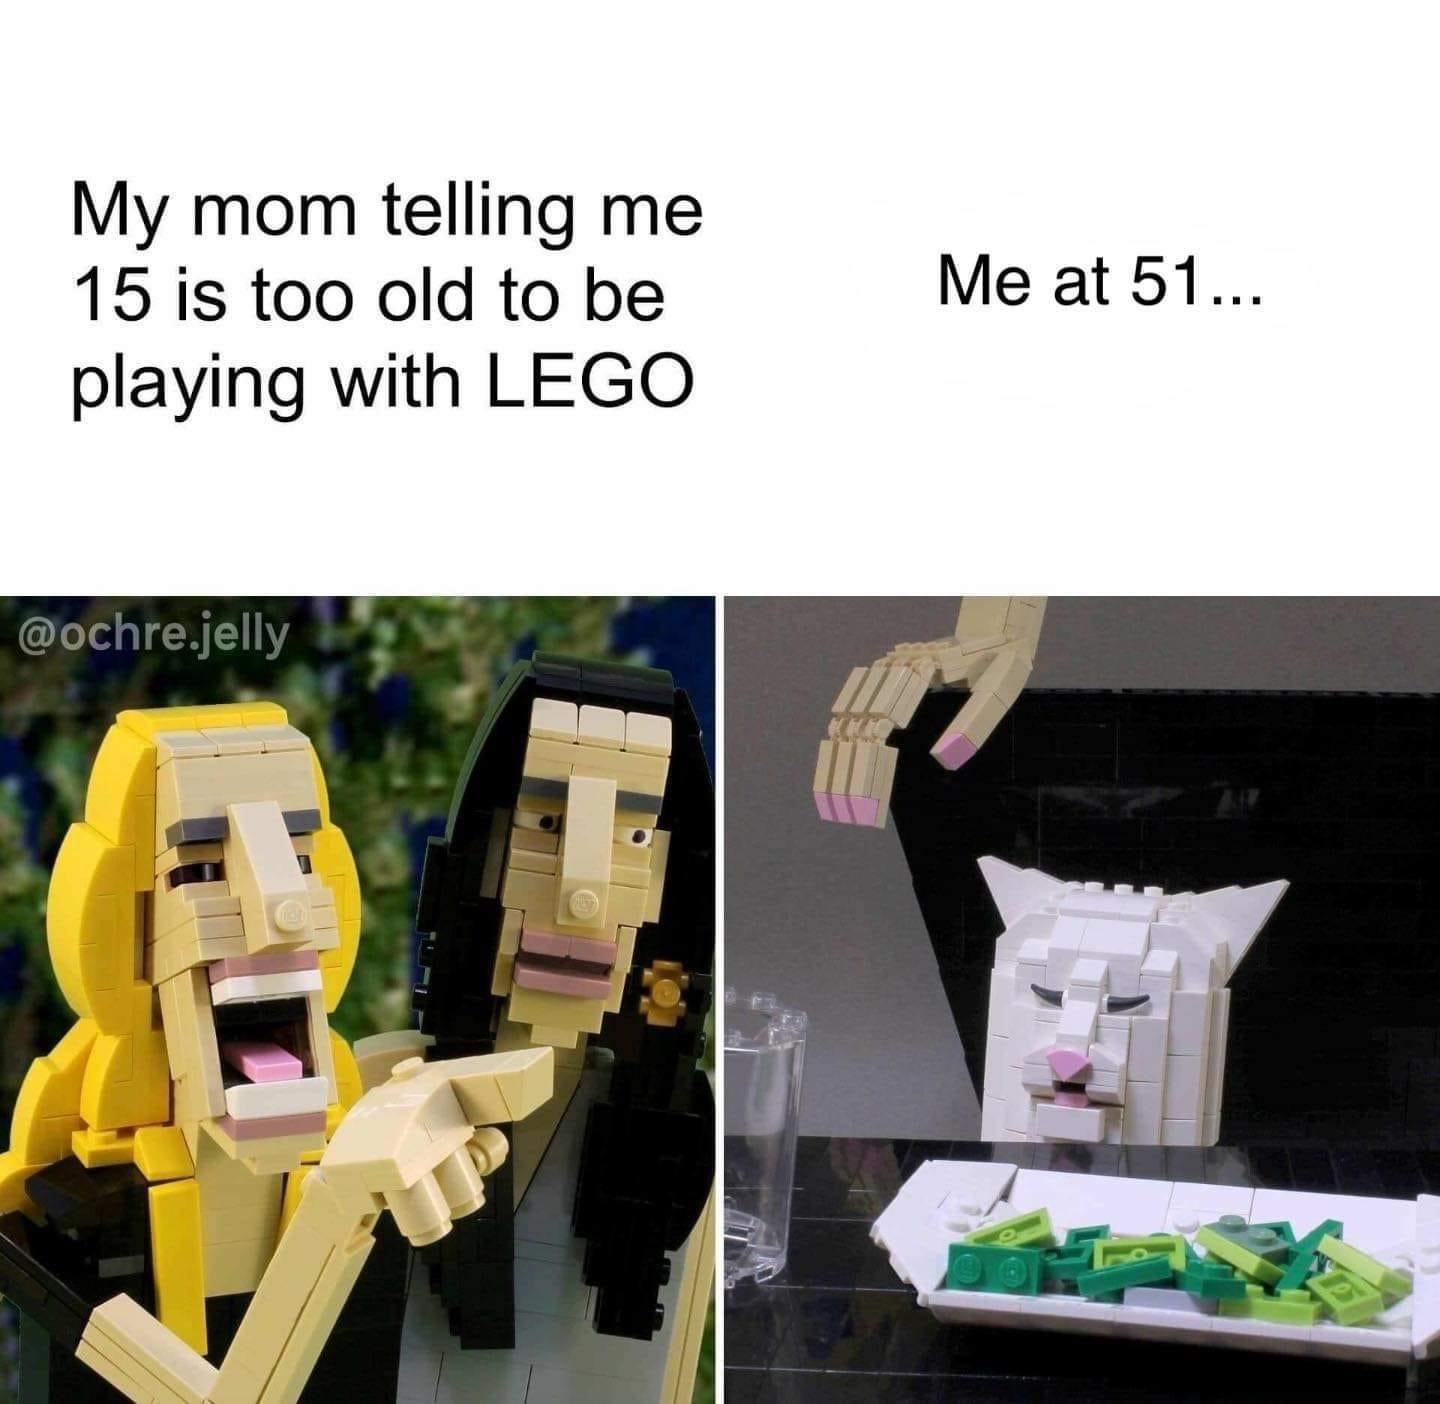 plastic - My mom telling me 15 is too old to be playing with Lego Me at 51... .jelly